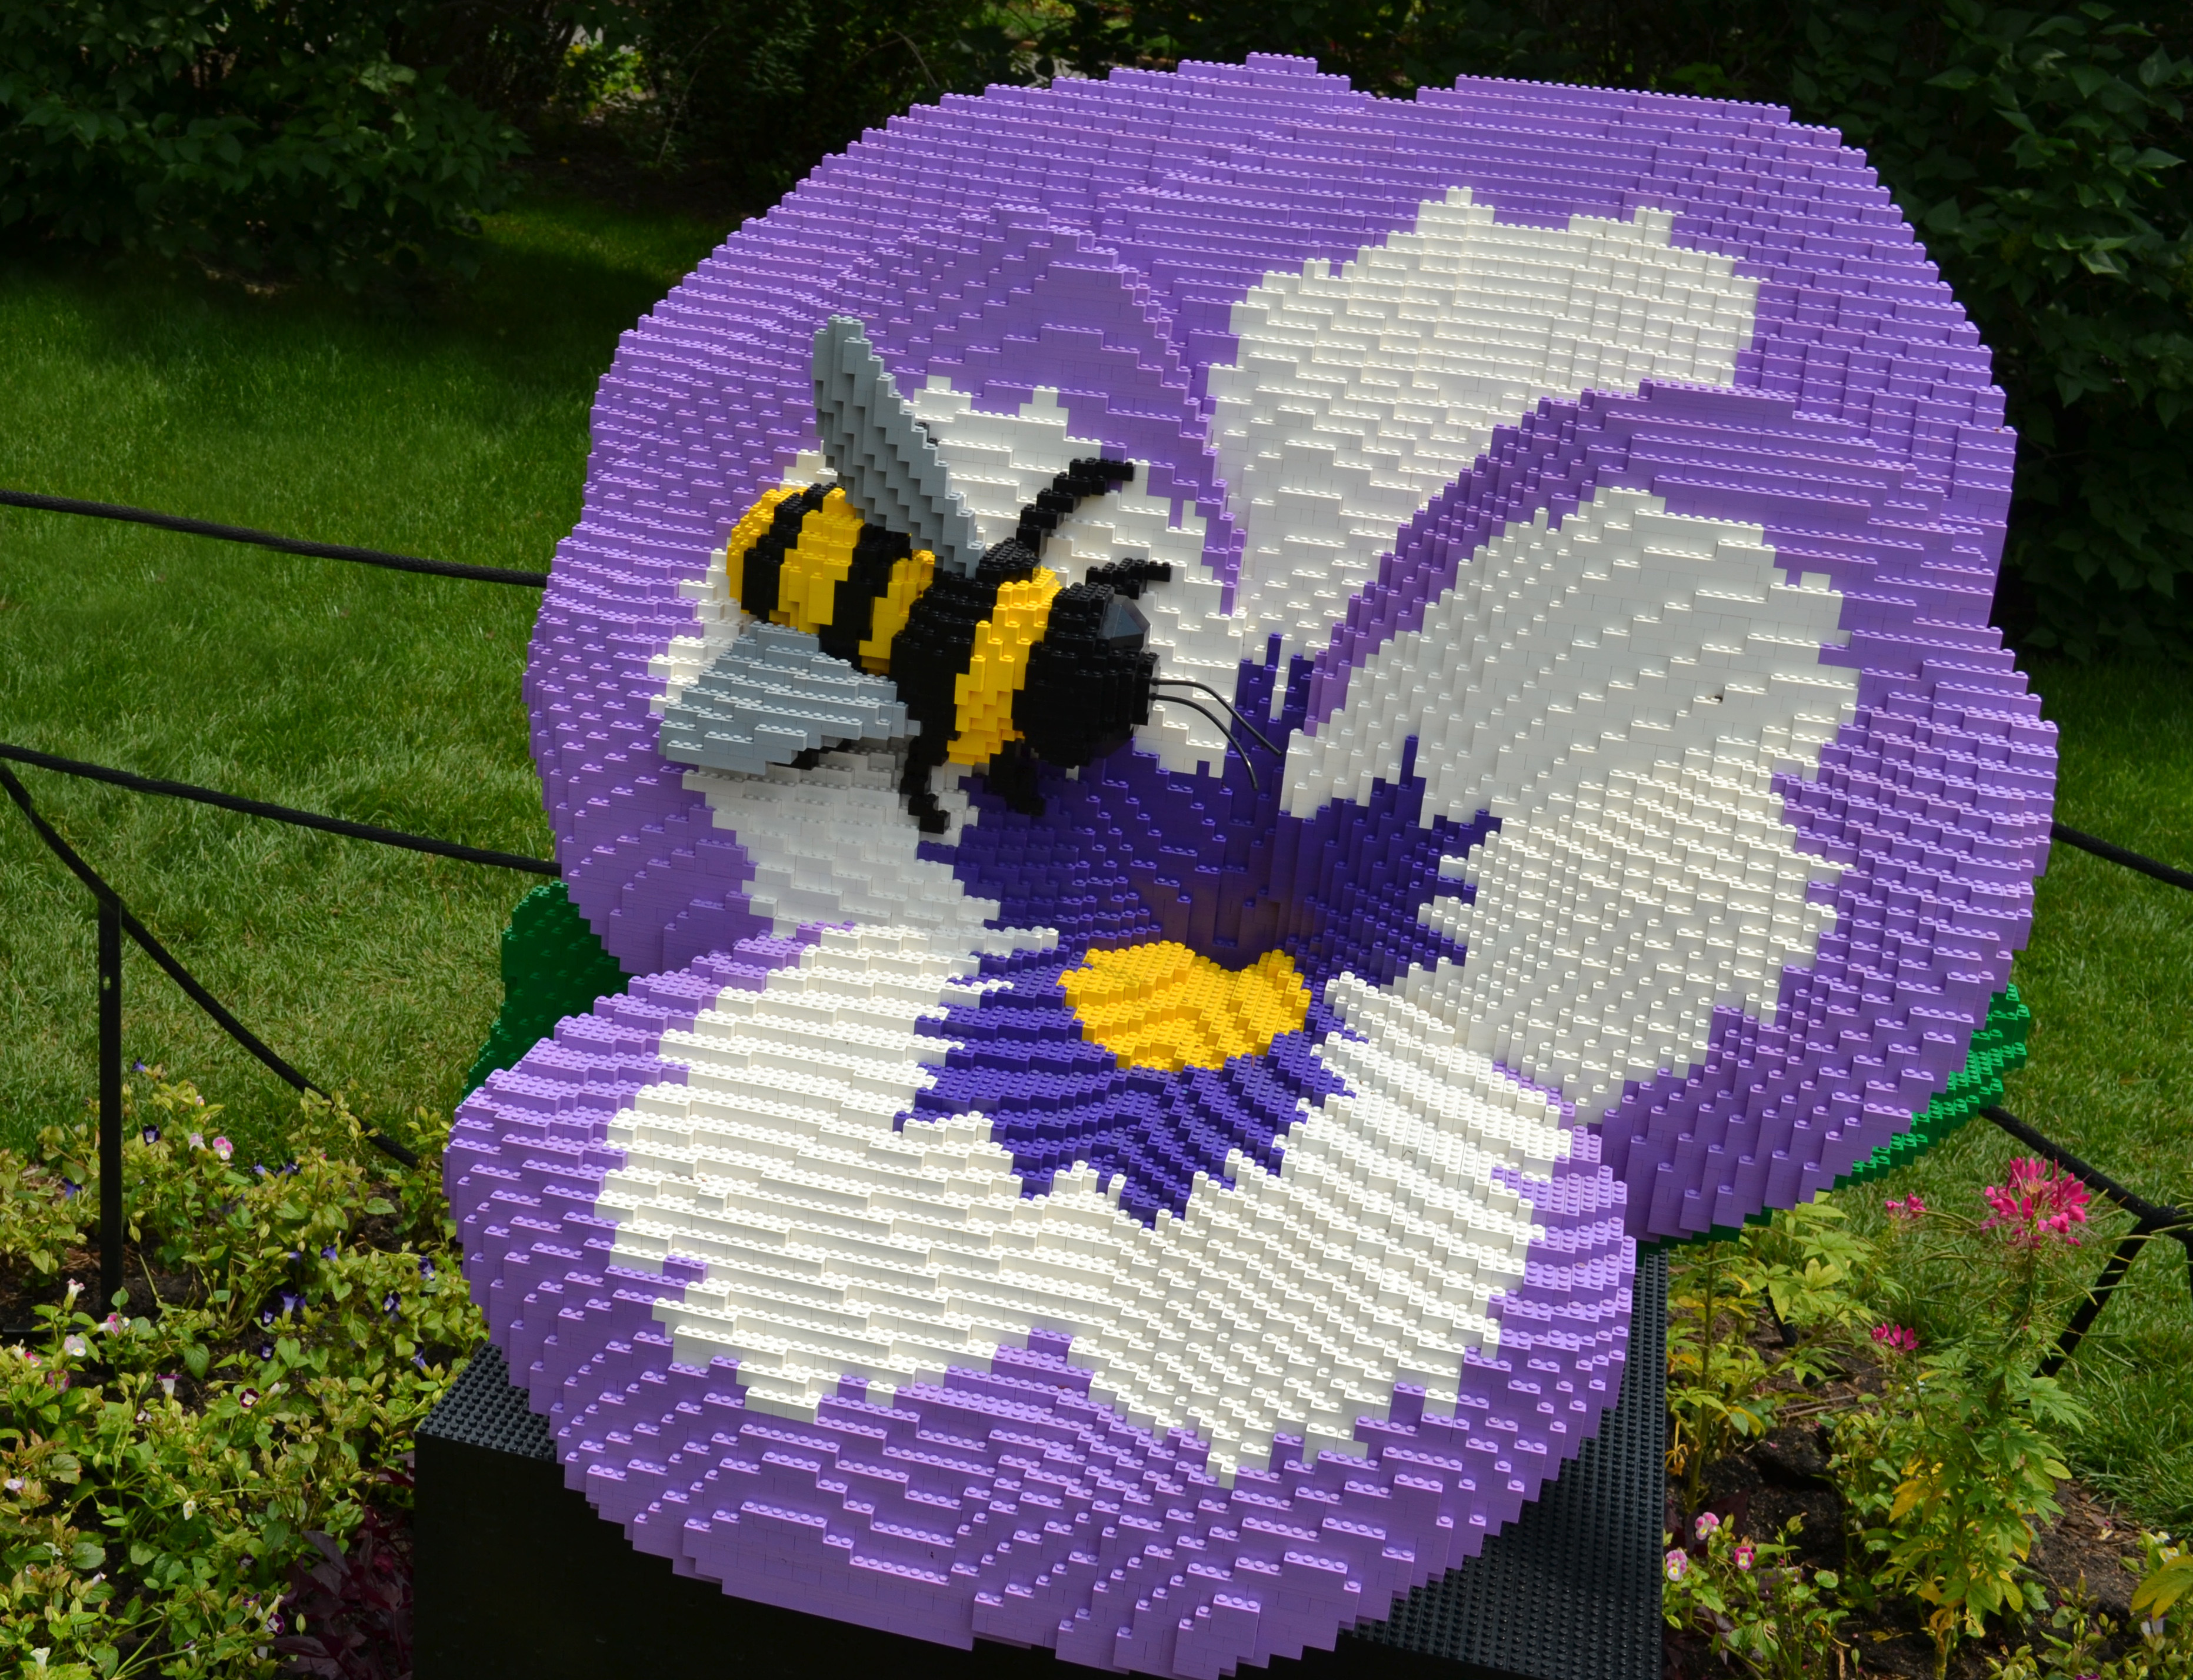 Sean Kenney's art with LEGO bricks - Pansy and bee